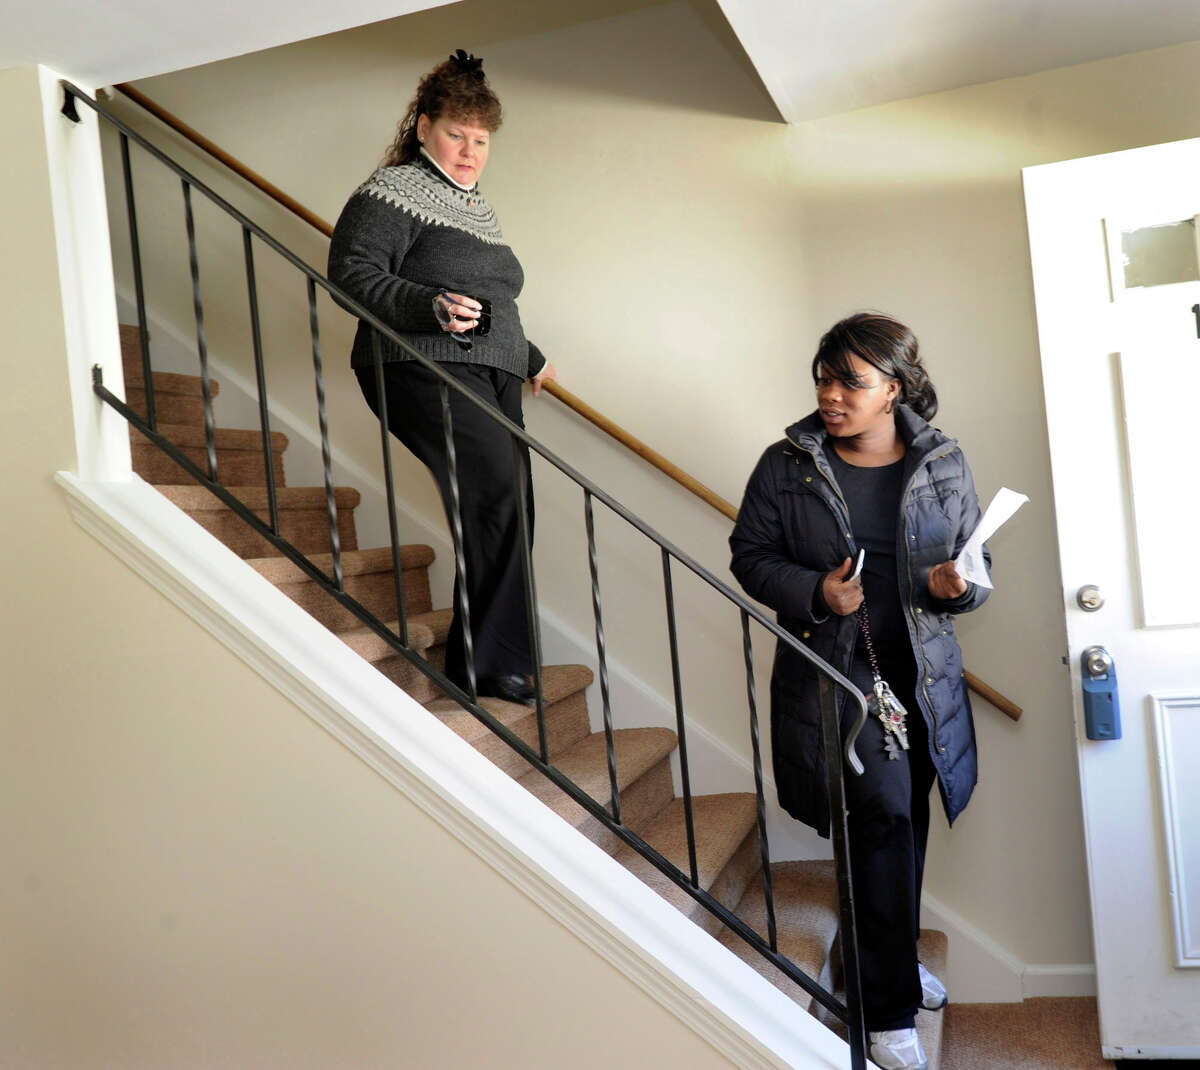 Carolyn Ridenour, 47, left, of Prudential Connecticut Realty, shows Ranisha Green, 25, of Danbury, an apartment for rent at Racing Brook Meadow 1 in Danbury, Conn. Tuesday, March 5, 2013